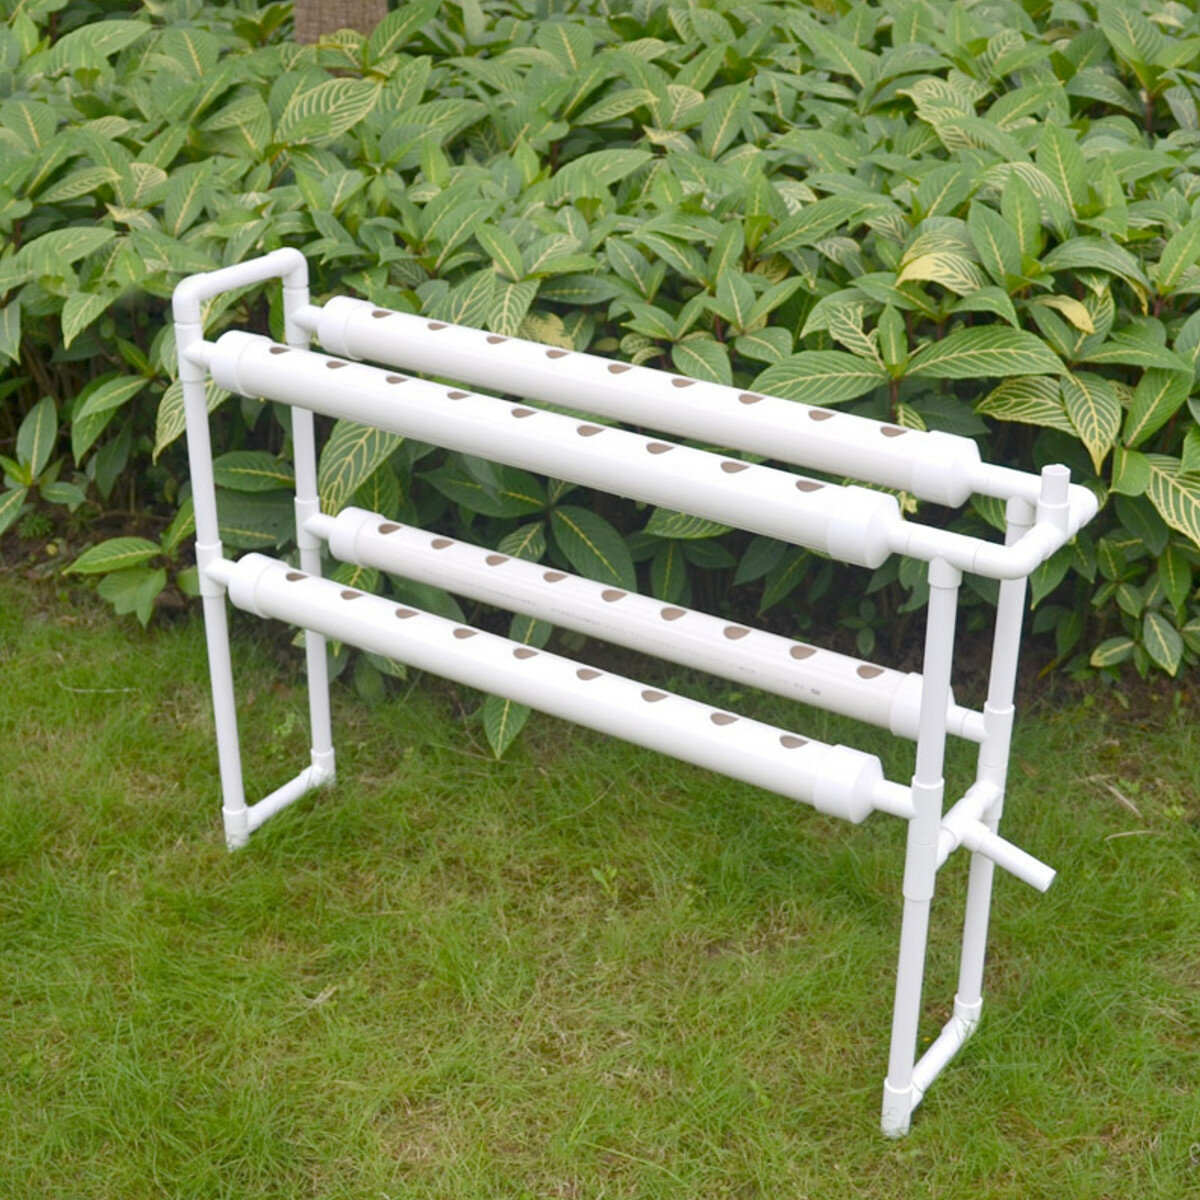 

2 Layer 36 Sites Hydroponic Grow Kit Ebb Flow Deep Water Culture Growing DWC Planting Garden Vegetable System